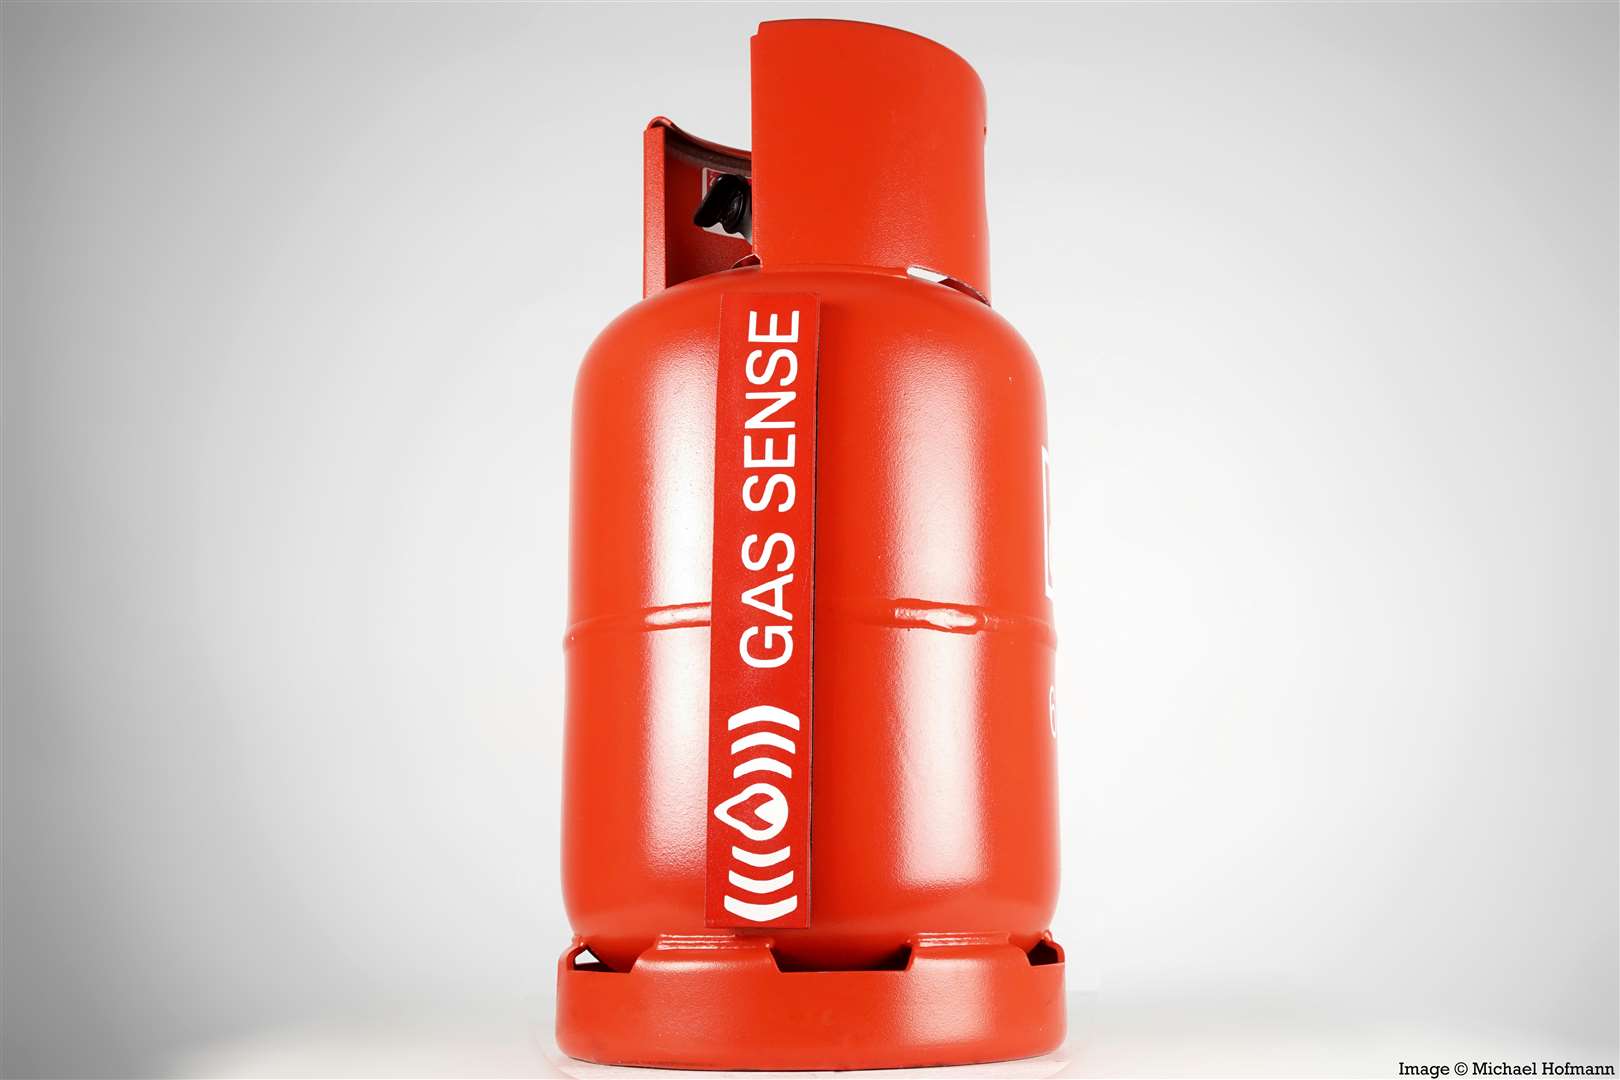 Gas Sense was launched using a crowdfunding campaign